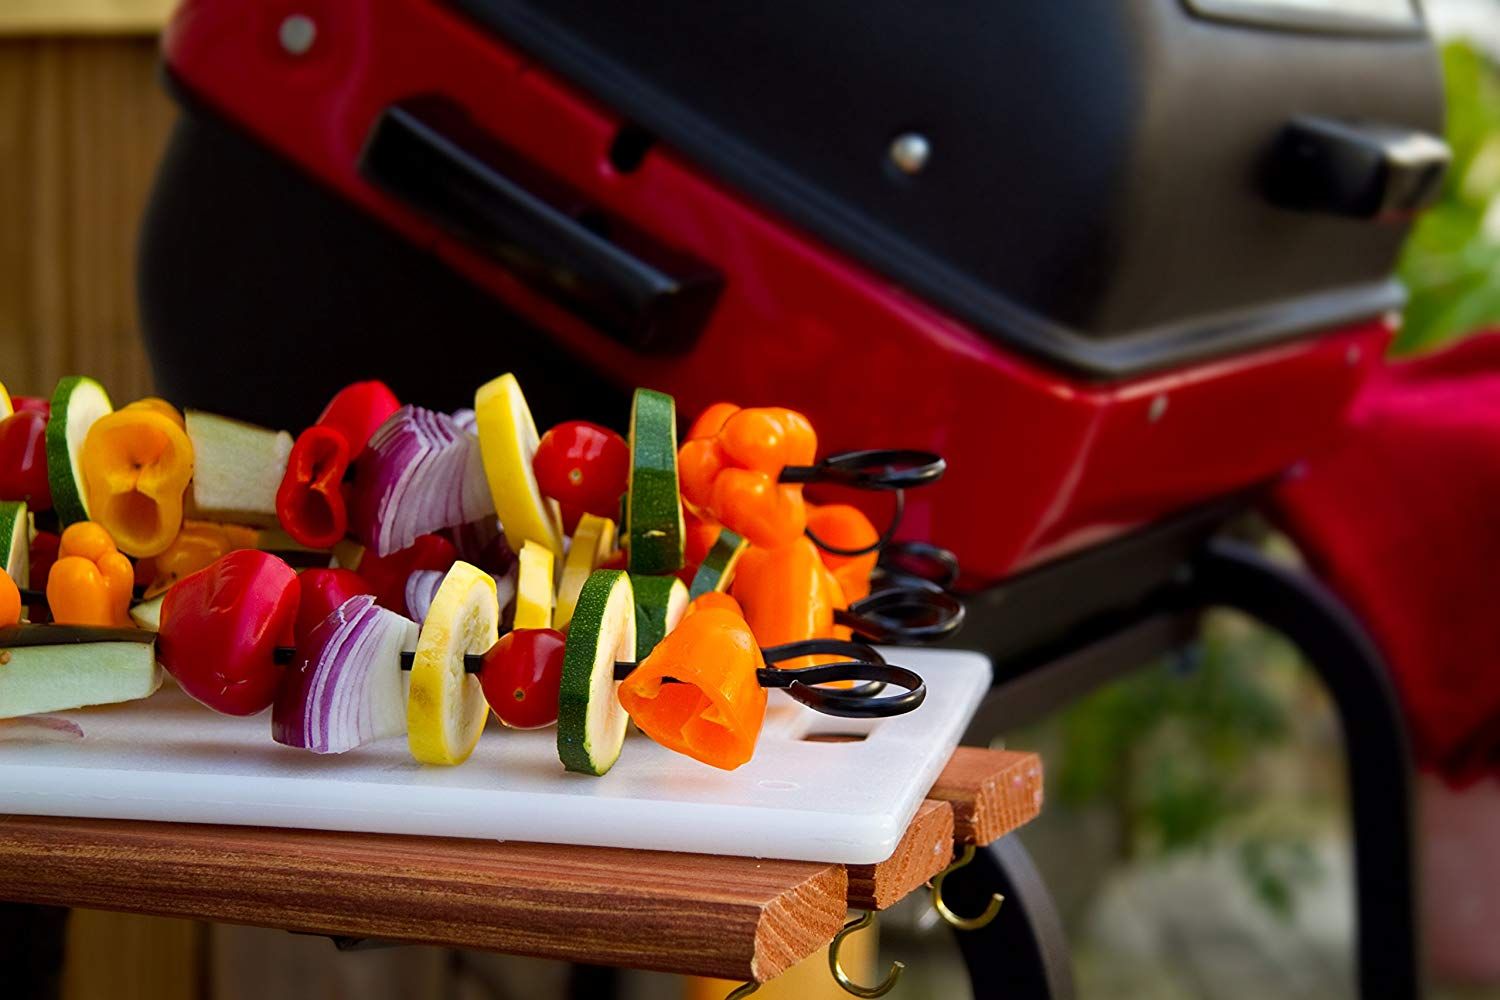 Weber Indoor Electric Grill - Buy Electric, Charcoal and Propane Grills At Best Prices